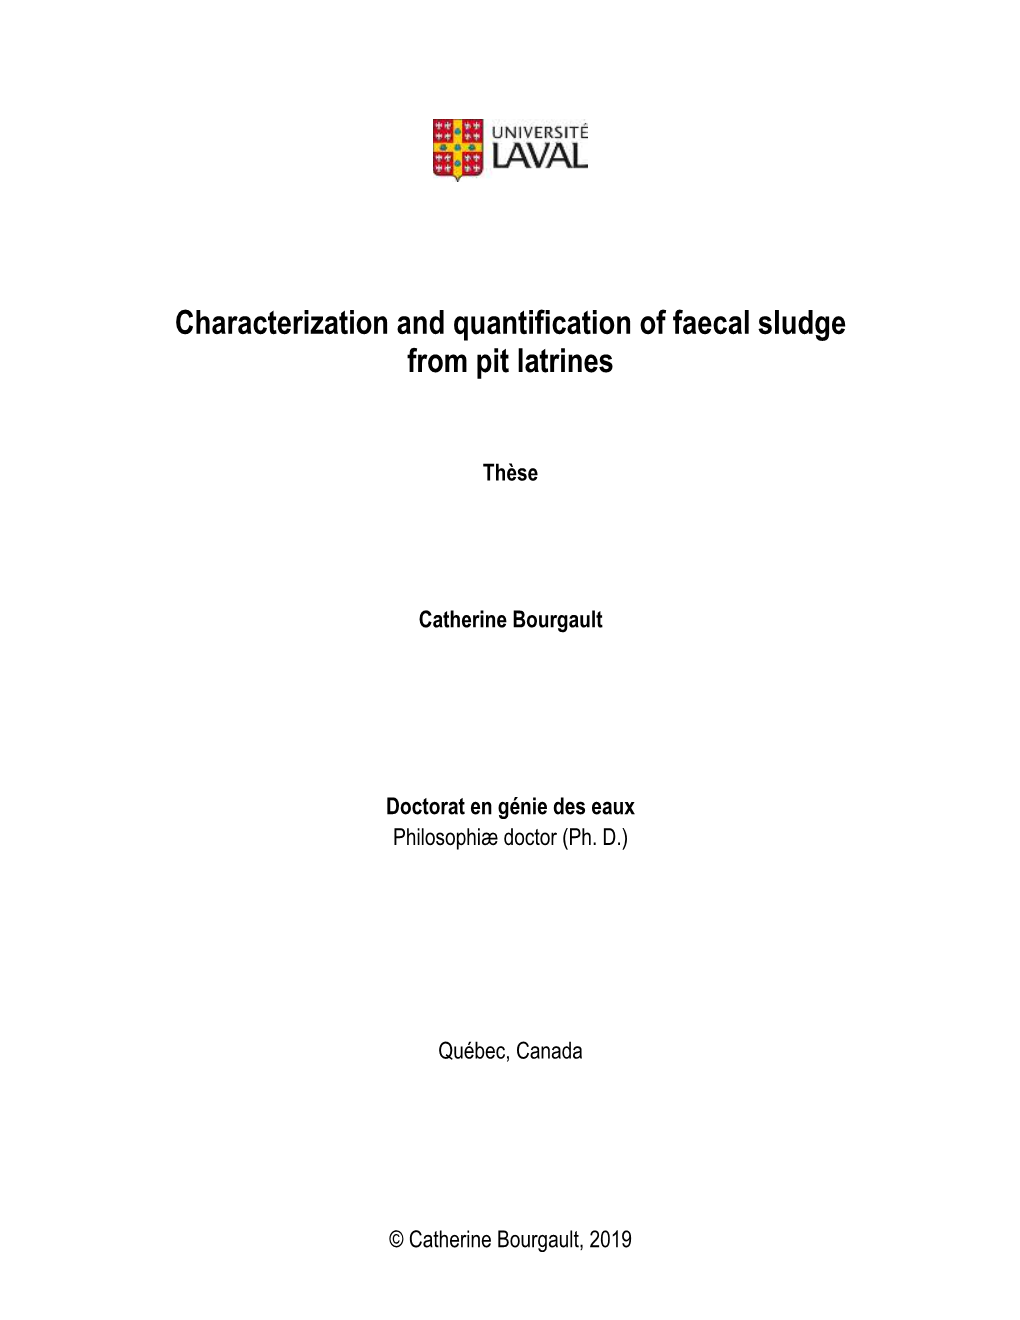 Characterization and Quantification of Faecal Sludge from Pit Latrines